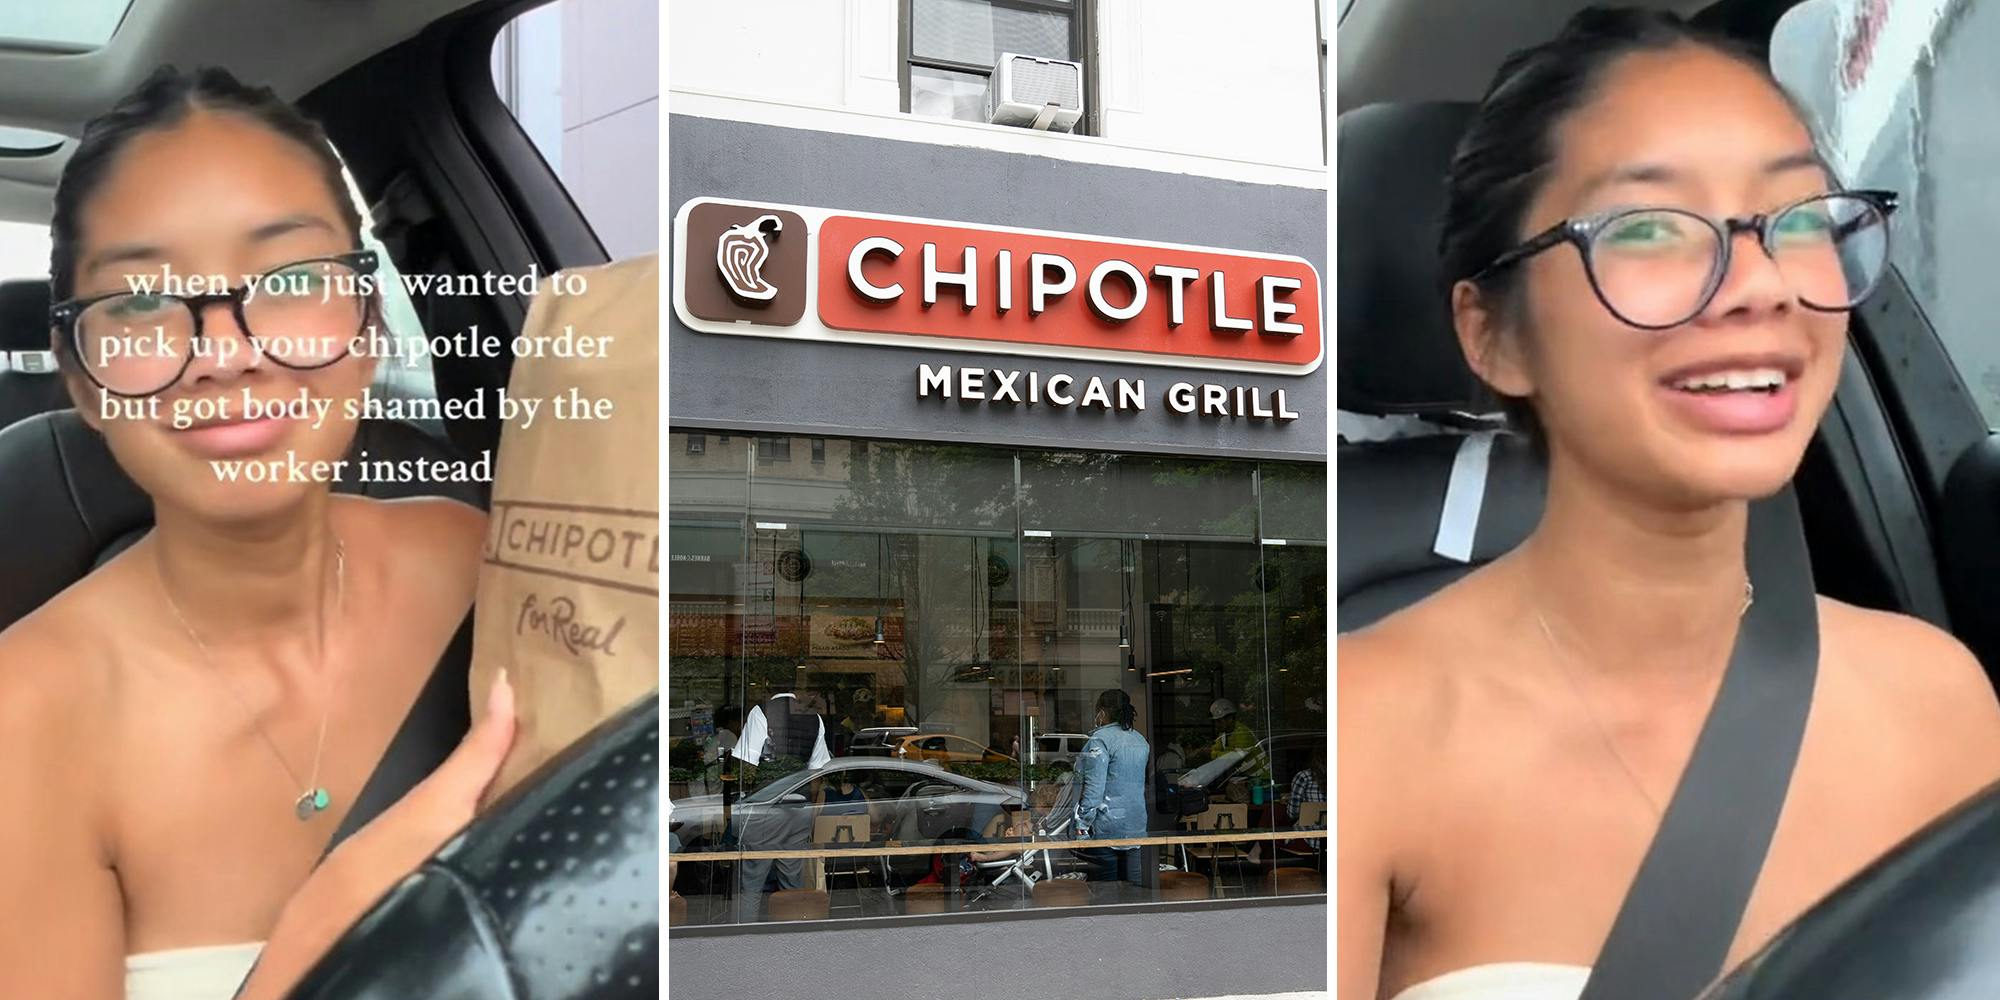 Customer says Chipotle worker bodyshamed her at the drive-thru